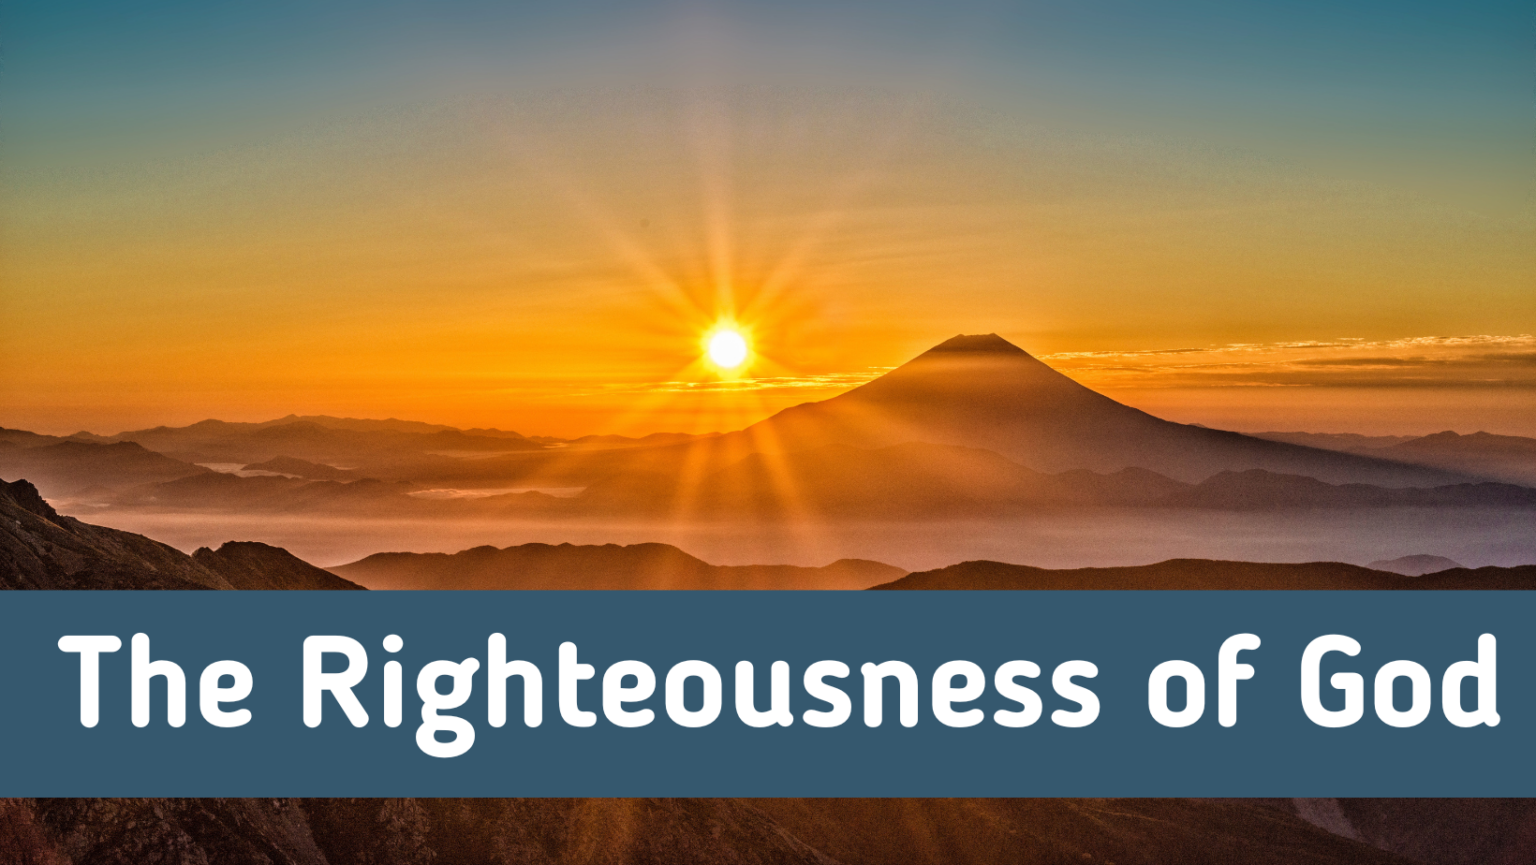 The Righteousness Of God 1536x865 